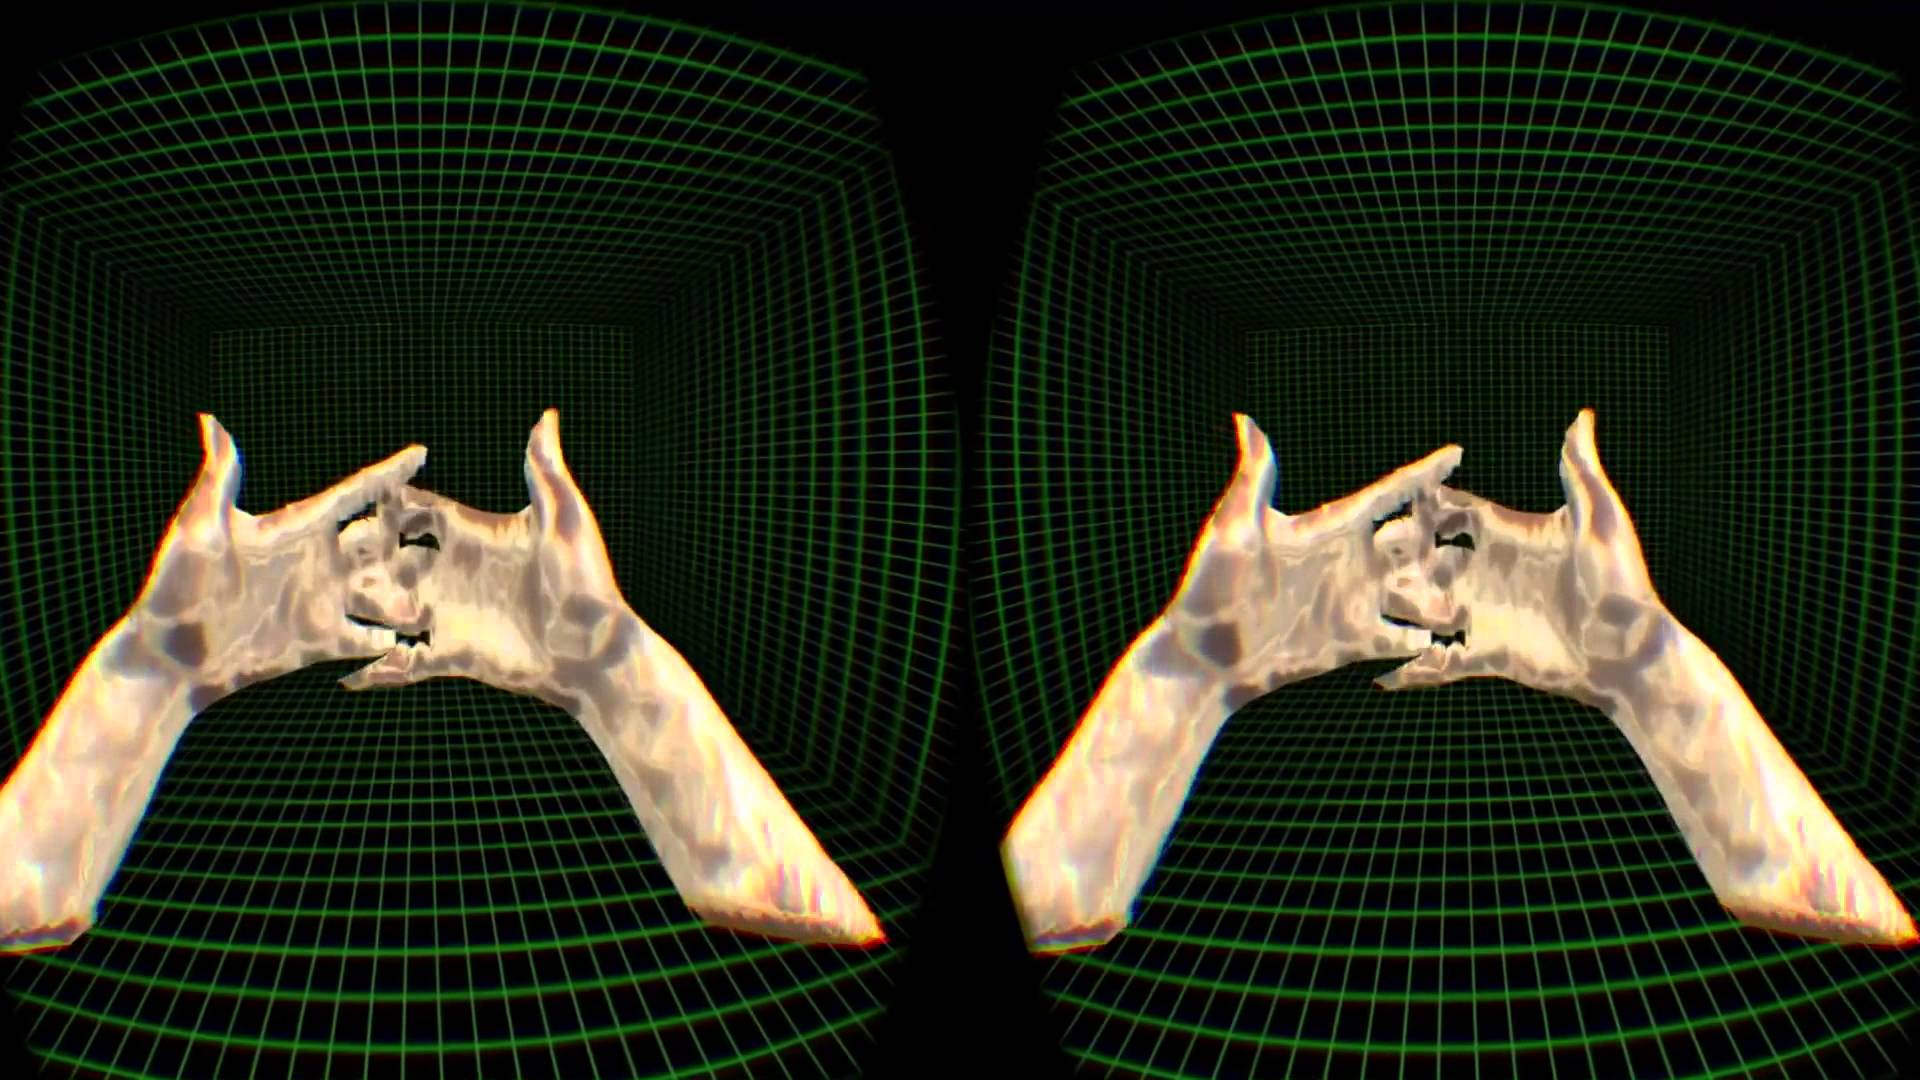 The Next Oculus Rift Might Let You See Your Actual Hands in VR